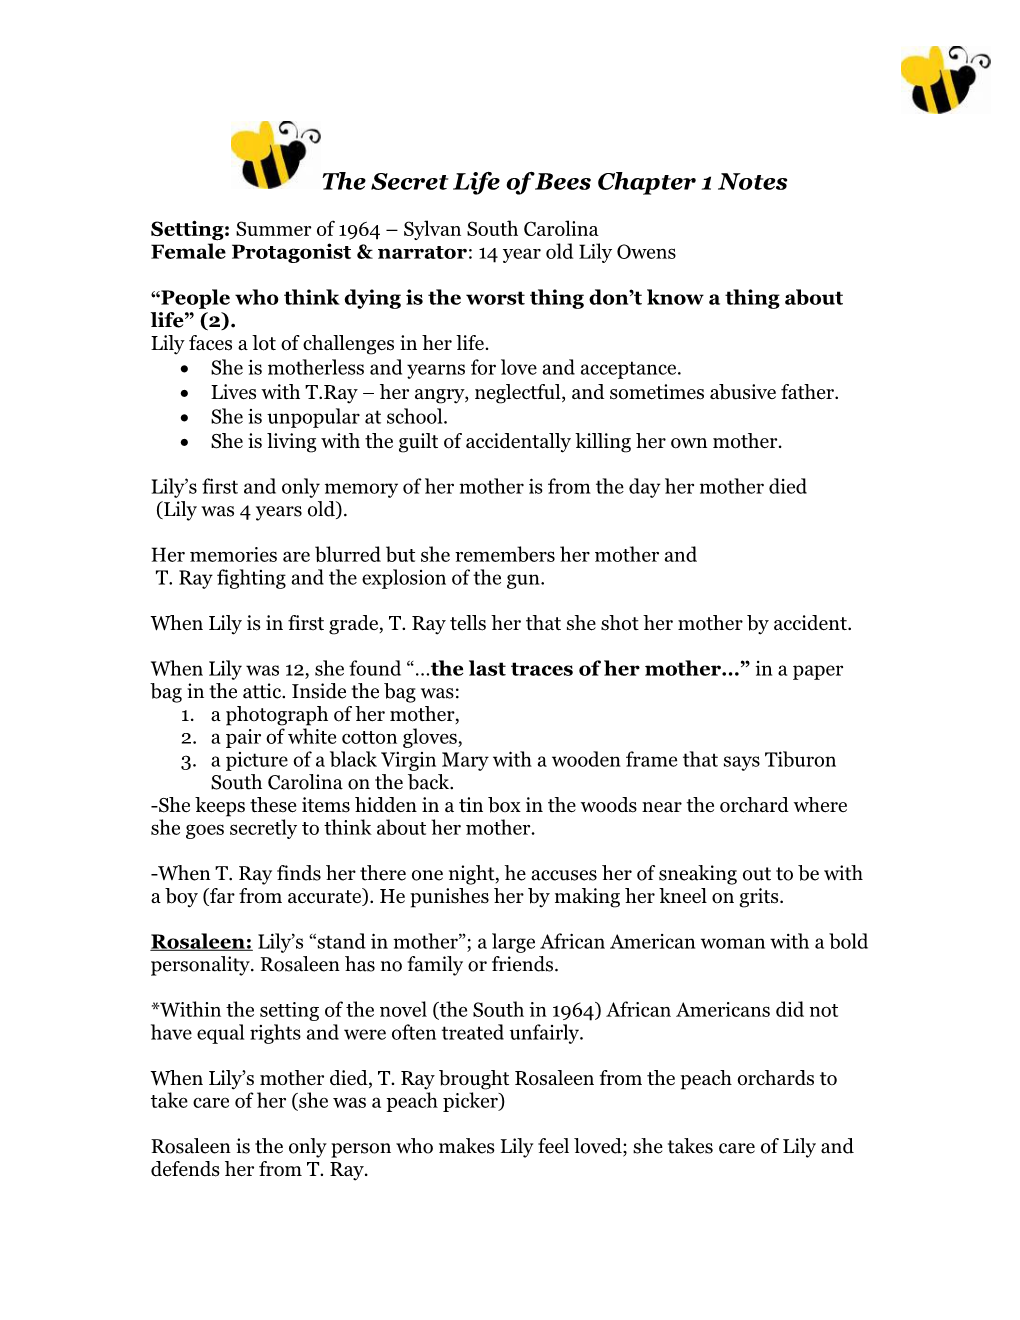 The Secret Life of Bees Chapter 1 Notes